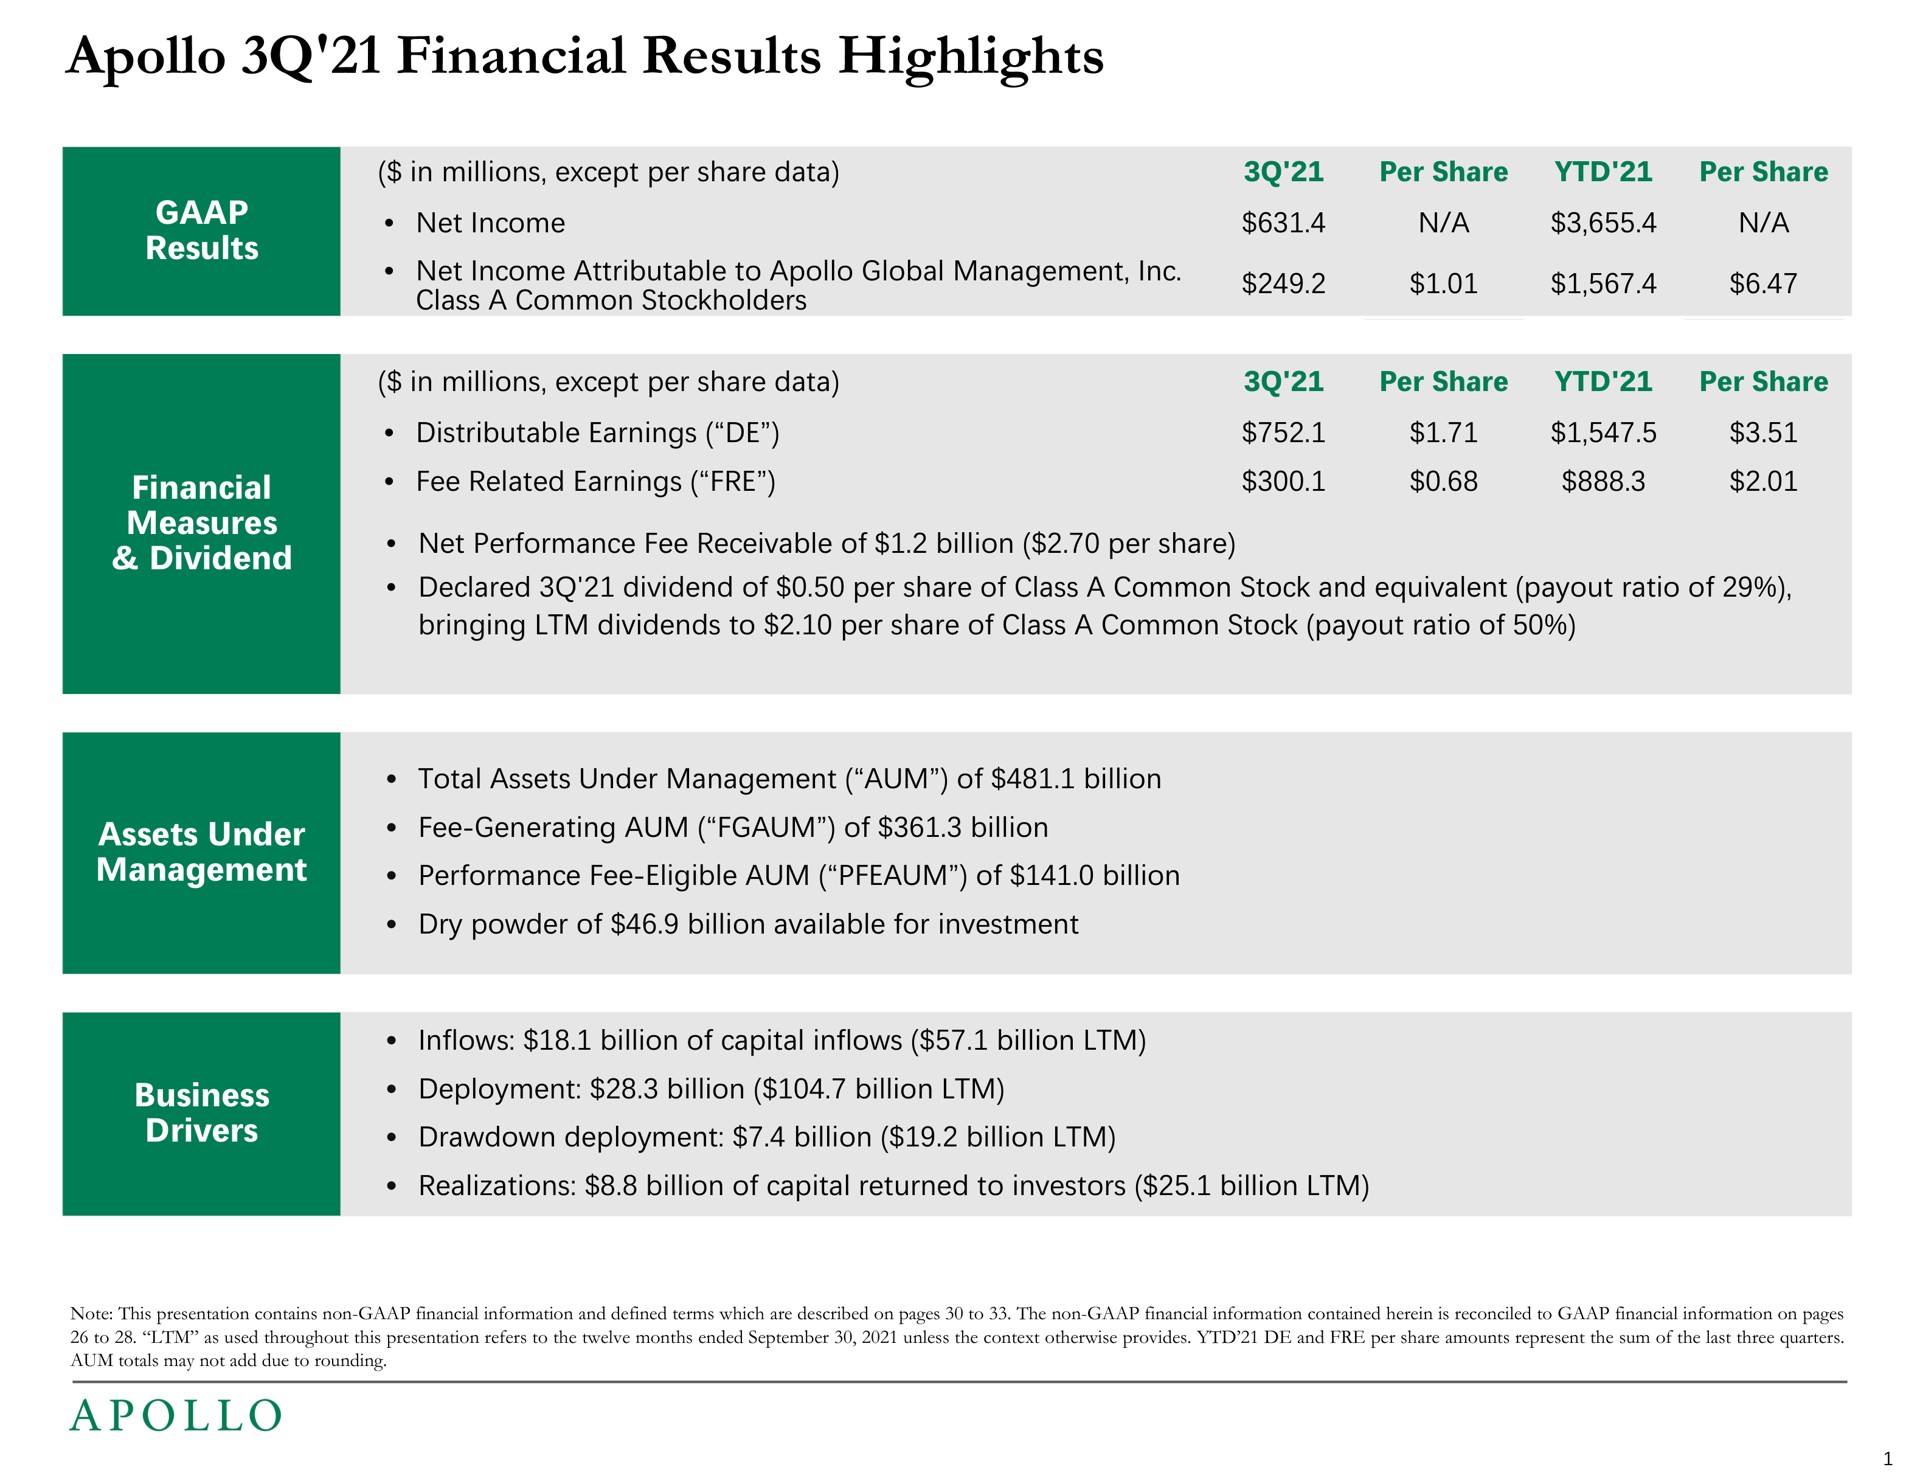 financial results highlights results financial measures dividend assets under management business drivers net income a a distributable earnings fee related earnings deployment billion billion drawdown deployment billion billion realizations billion of capital returned to investors billion | Apollo Global Management